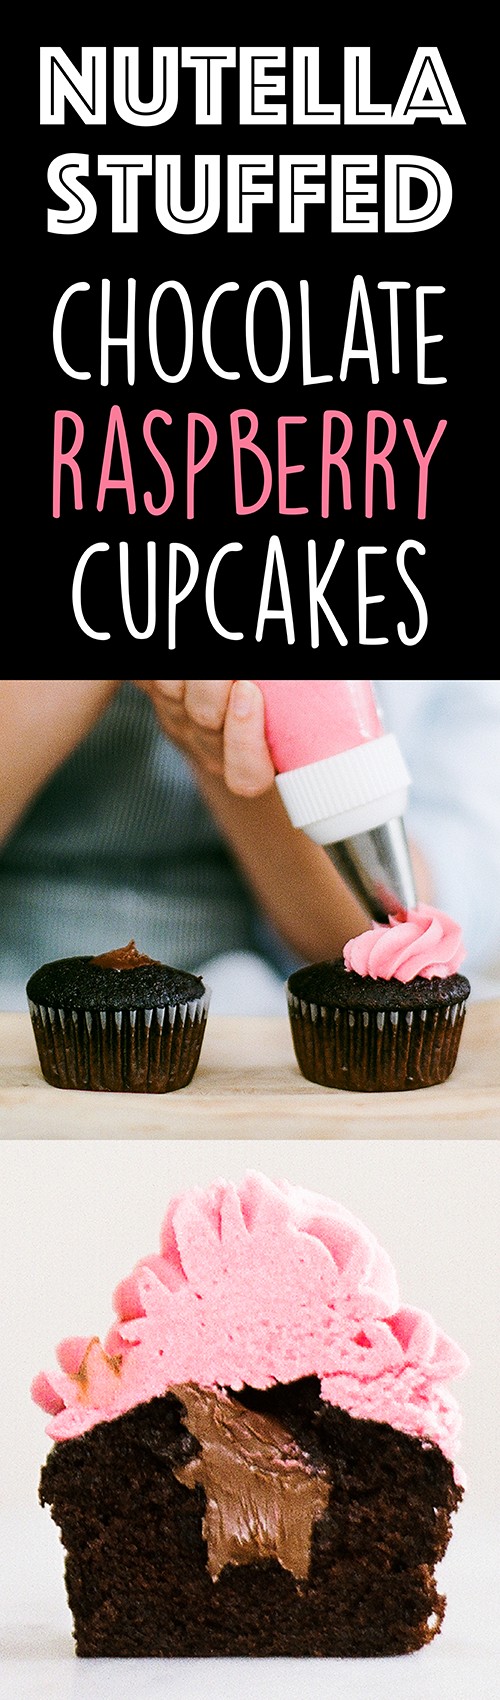 This cupcake recipe is PERFECT for Valentine's Day, Mother's Day, or any occasion! Everyone LOVES the surprise Nutella filling.